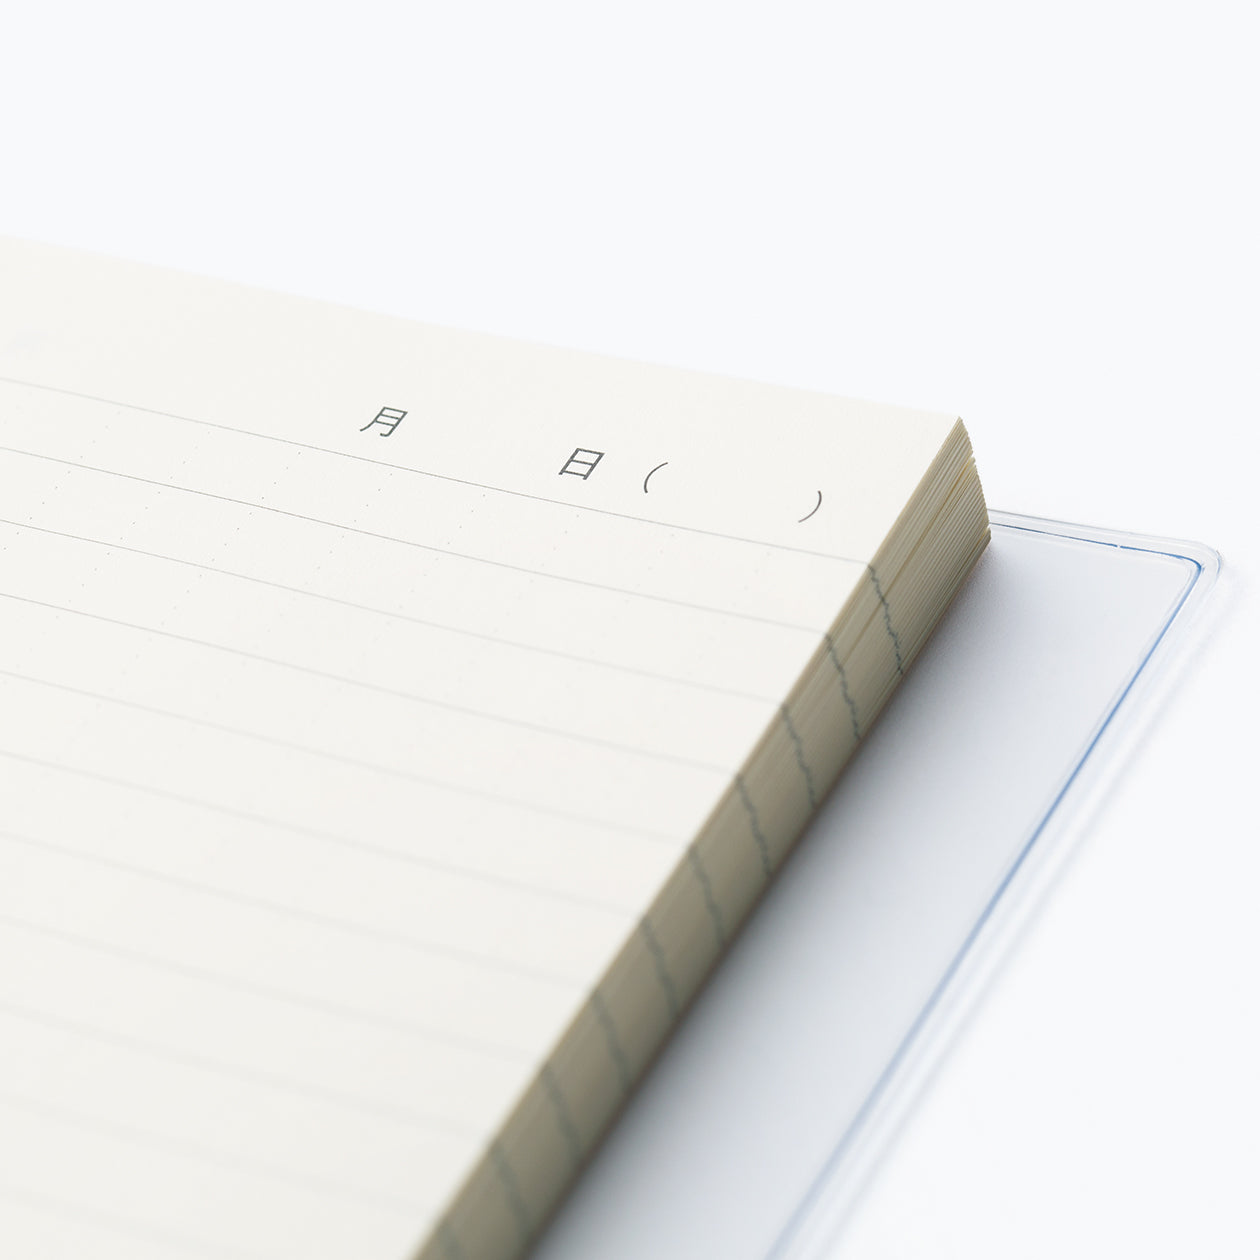 Planted Tree Paper Free Schedule Note MUJI